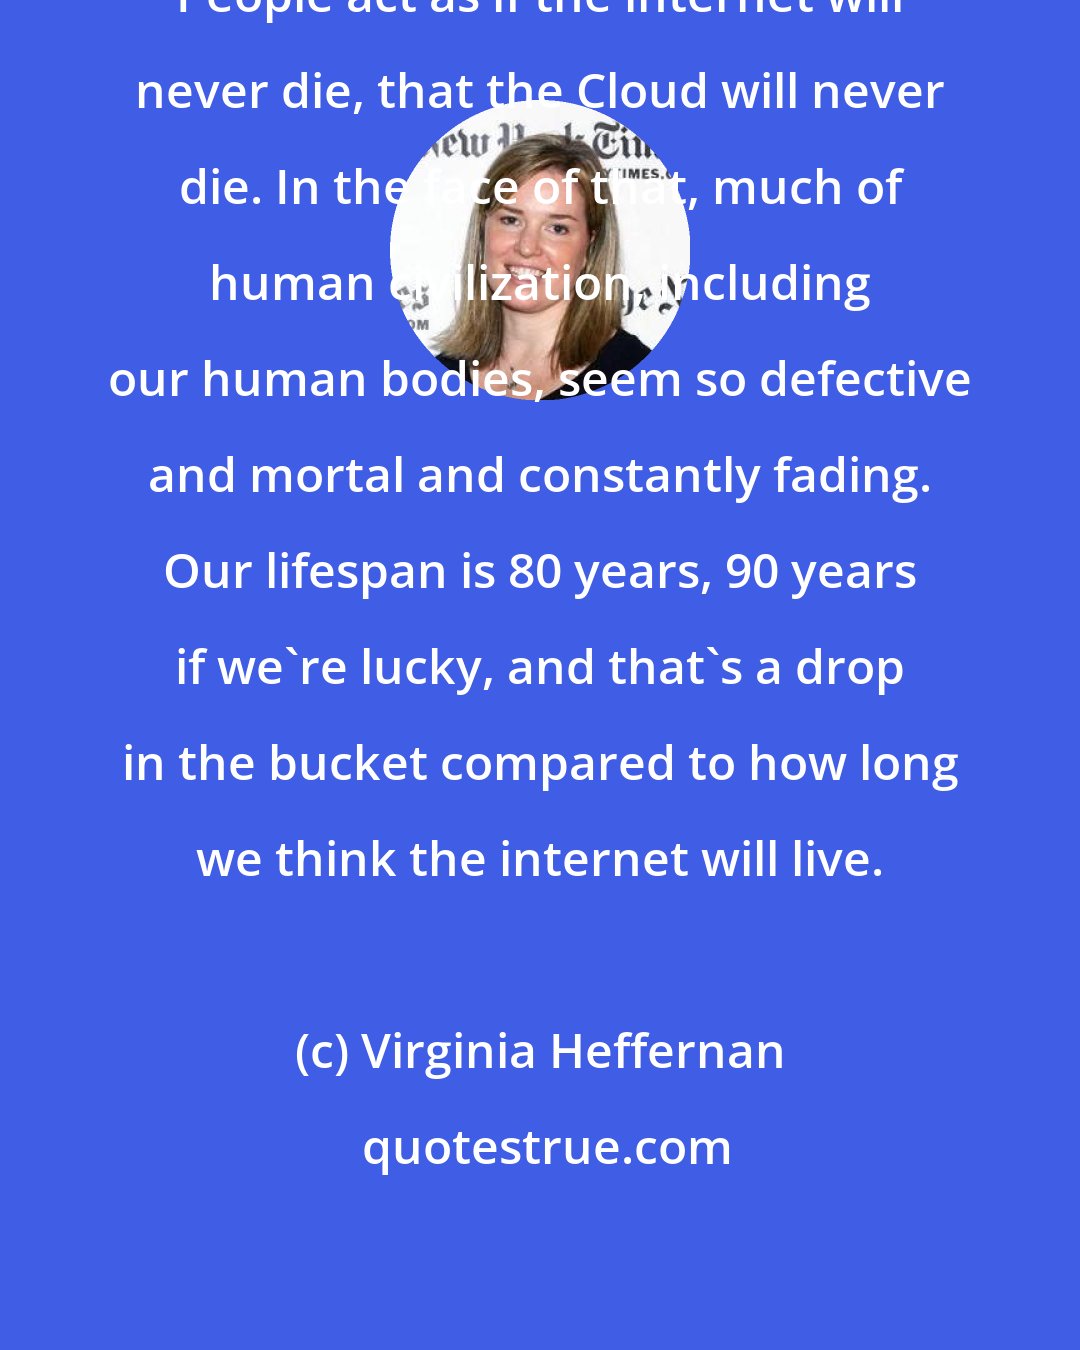 Virginia Heffernan: People act as if the internet will never die, that the Cloud will never die. In the face of that, much of human civilization, including our human bodies, seem so defective and mortal and constantly fading. Our lifespan is 80 years, 90 years if we're lucky, and that's a drop in the bucket compared to how long we think the internet will live.